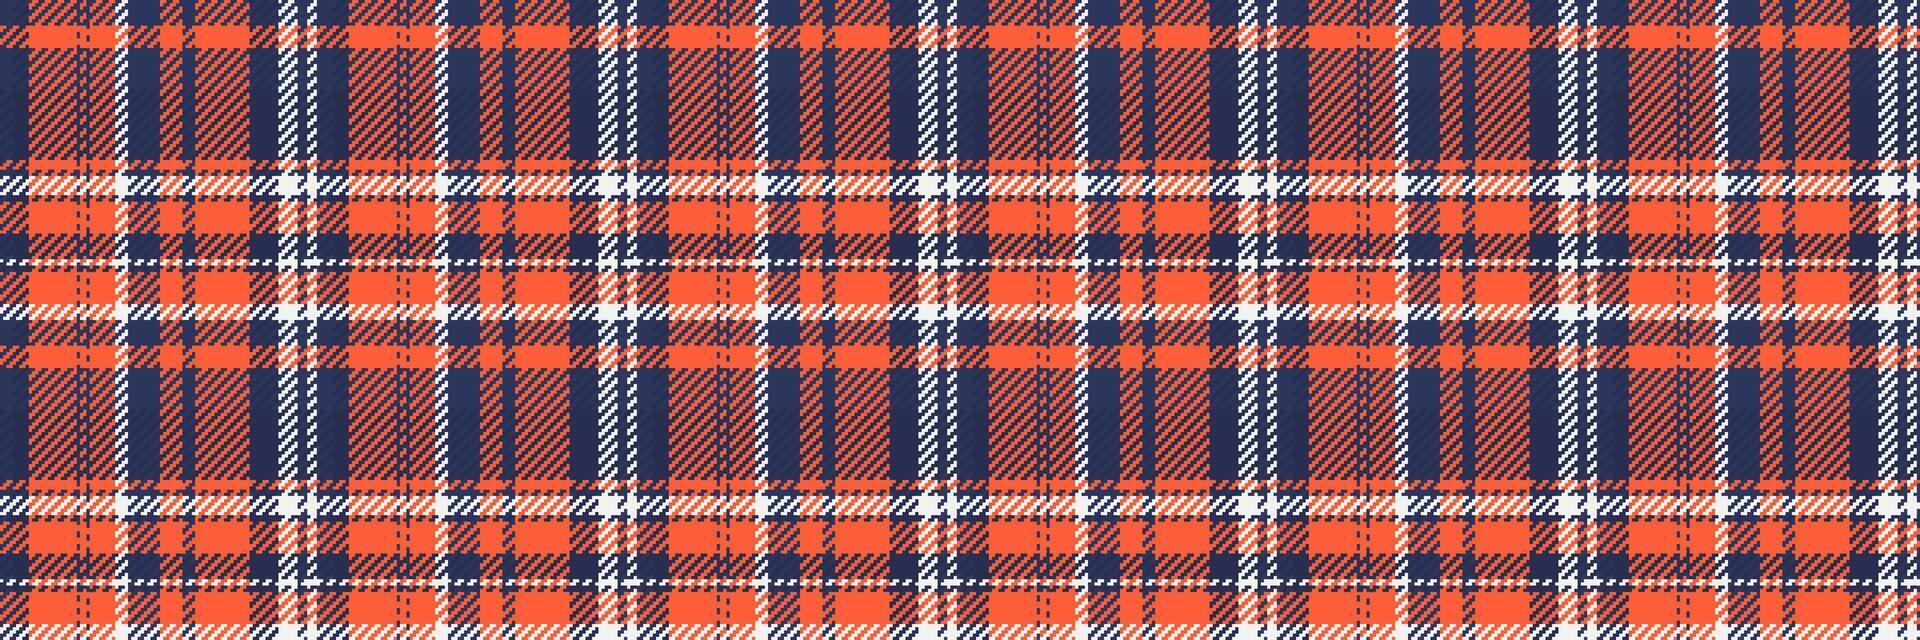 Latin texture pattern seamless, modern tartan vector background. Tape plaid check textile fabric in blue and red colors.